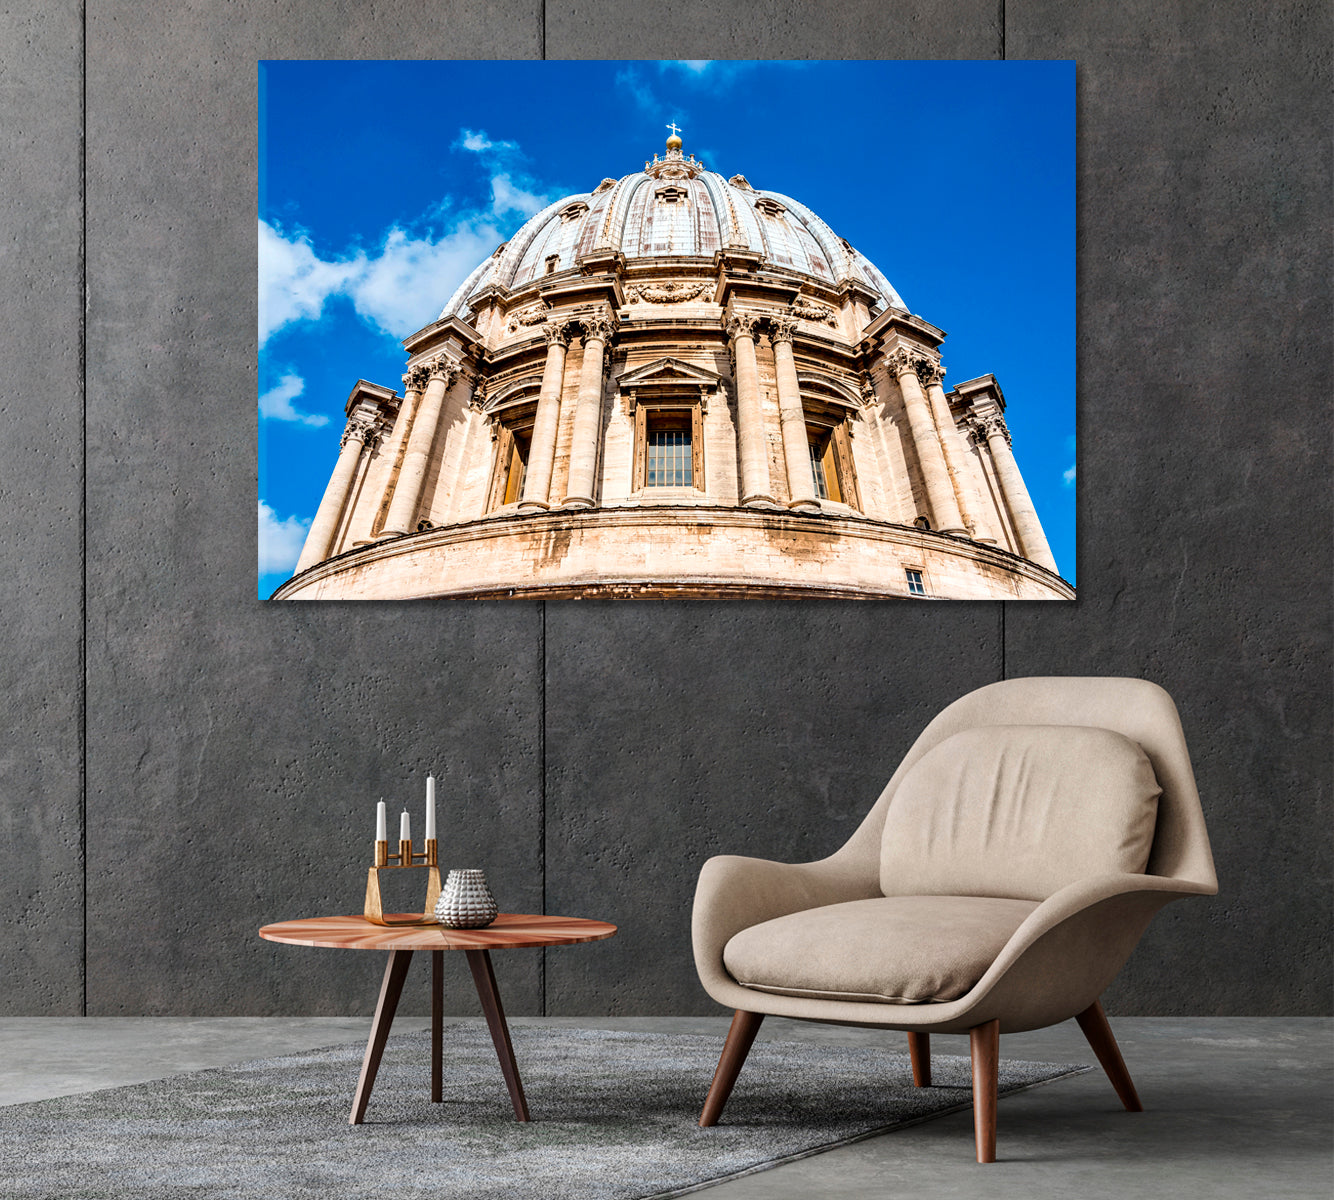 Dome of St. Peter's Basilica Vatican Italy Canvas Print-Canvas Print-CetArt-1 Panel-24x16 inches-CetArt